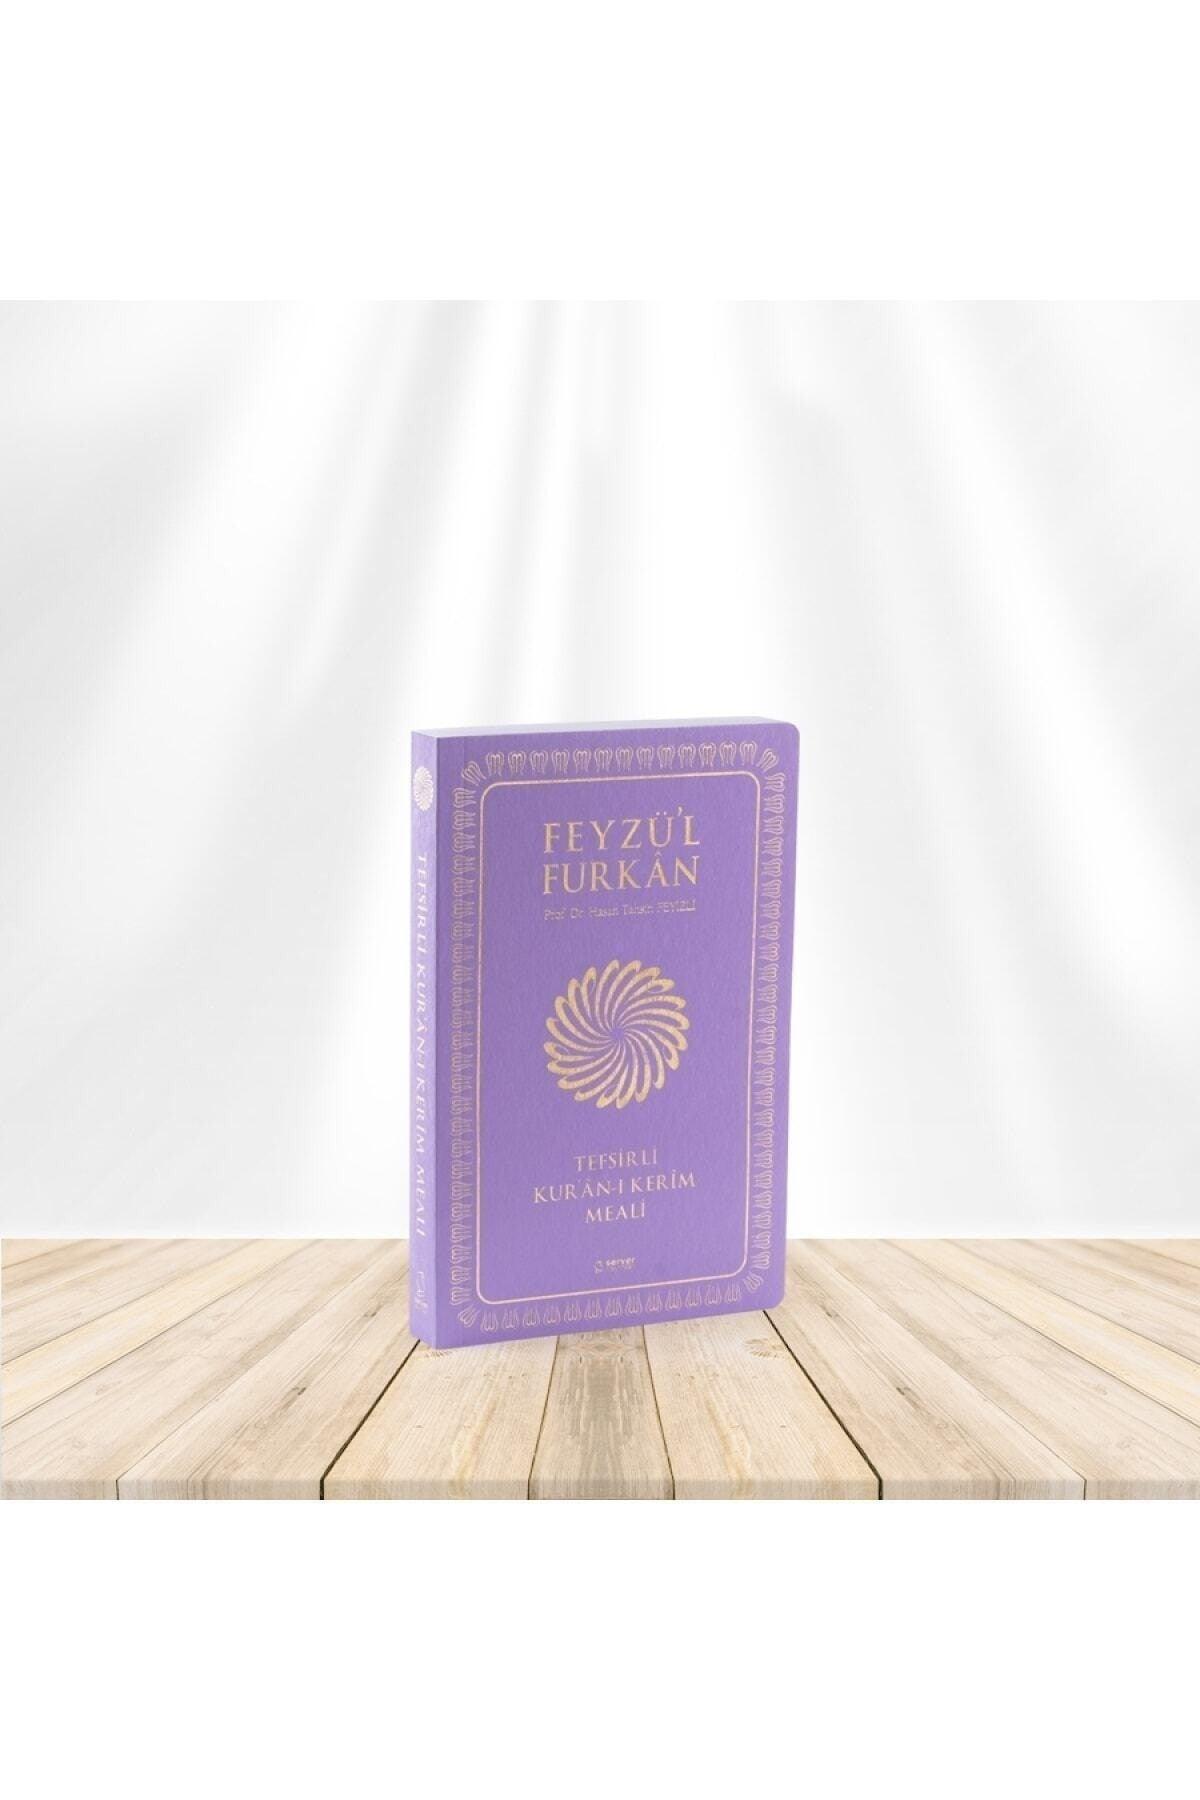 Feyzü'l Furkan Translation of the Qur'an with Commentary - Pocket Size - Thin Skin - Lilac - Swordslife